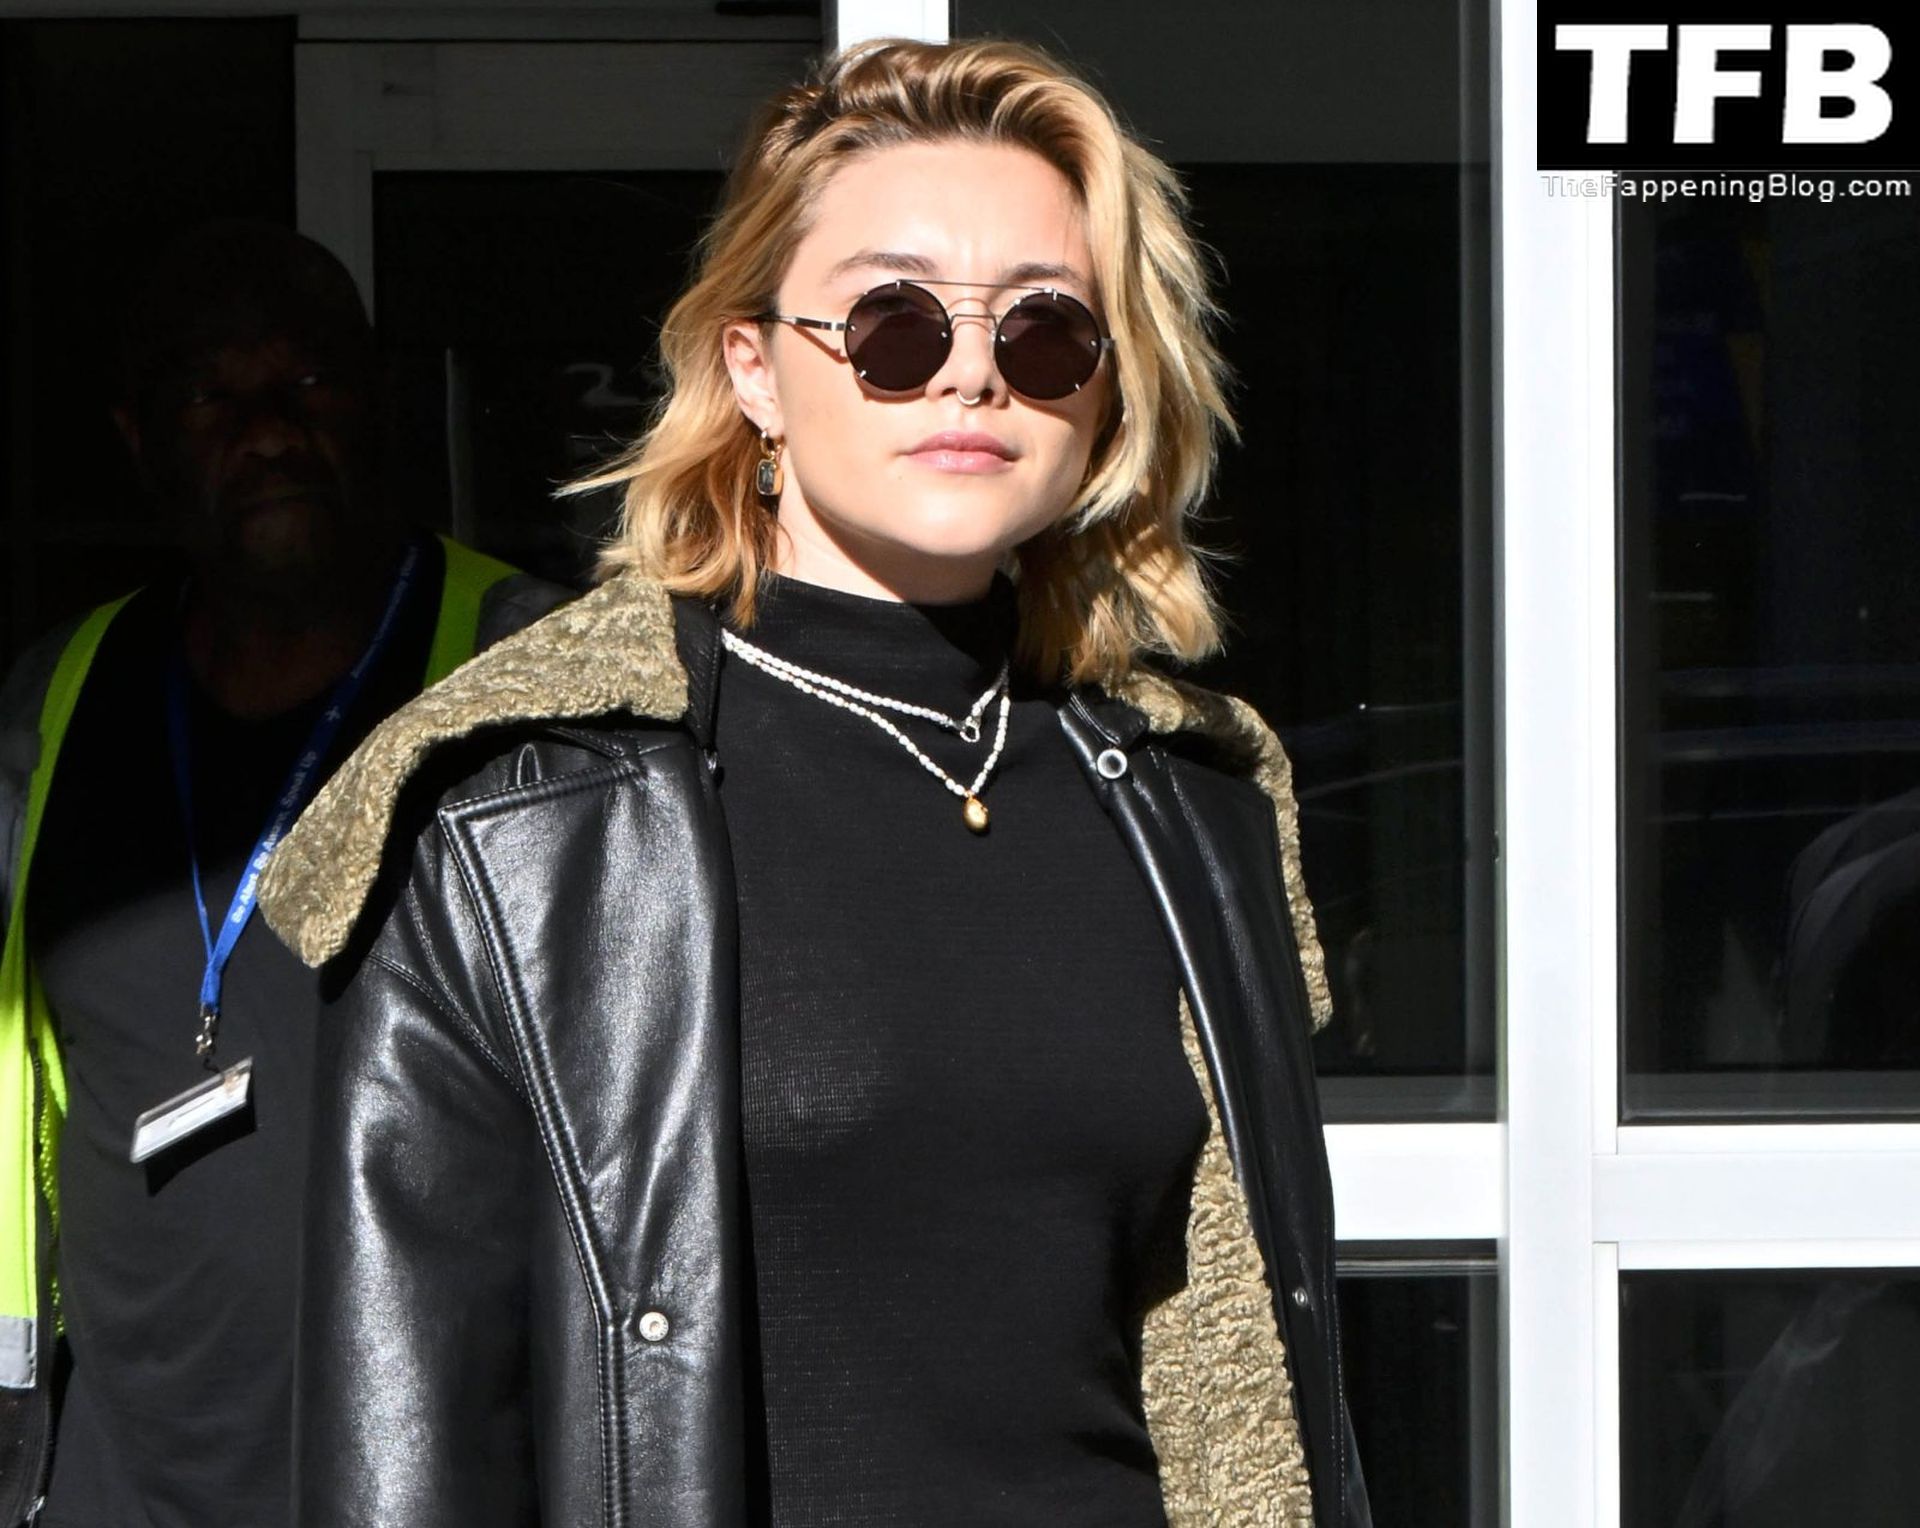 Florence Pugh Pokies The Fappening Blog 27 - Florence Pugh Shows Off Her Pokies at JFK airport in NYC (31 Photos)